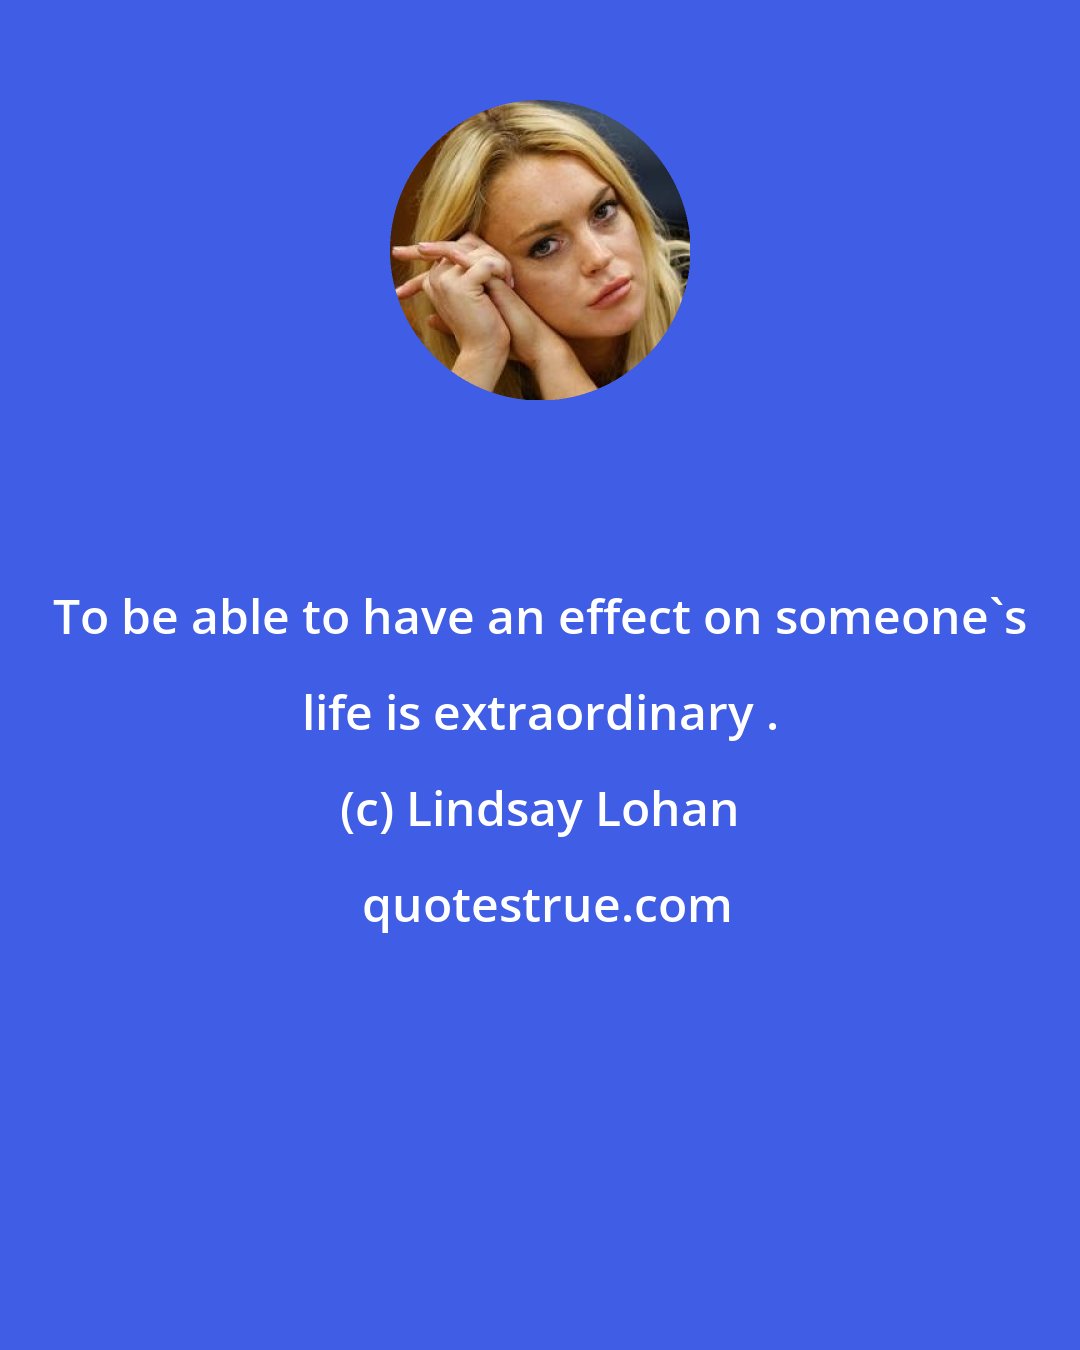 Lindsay Lohan: To be able to have an effect on someone's life is extraordinary .